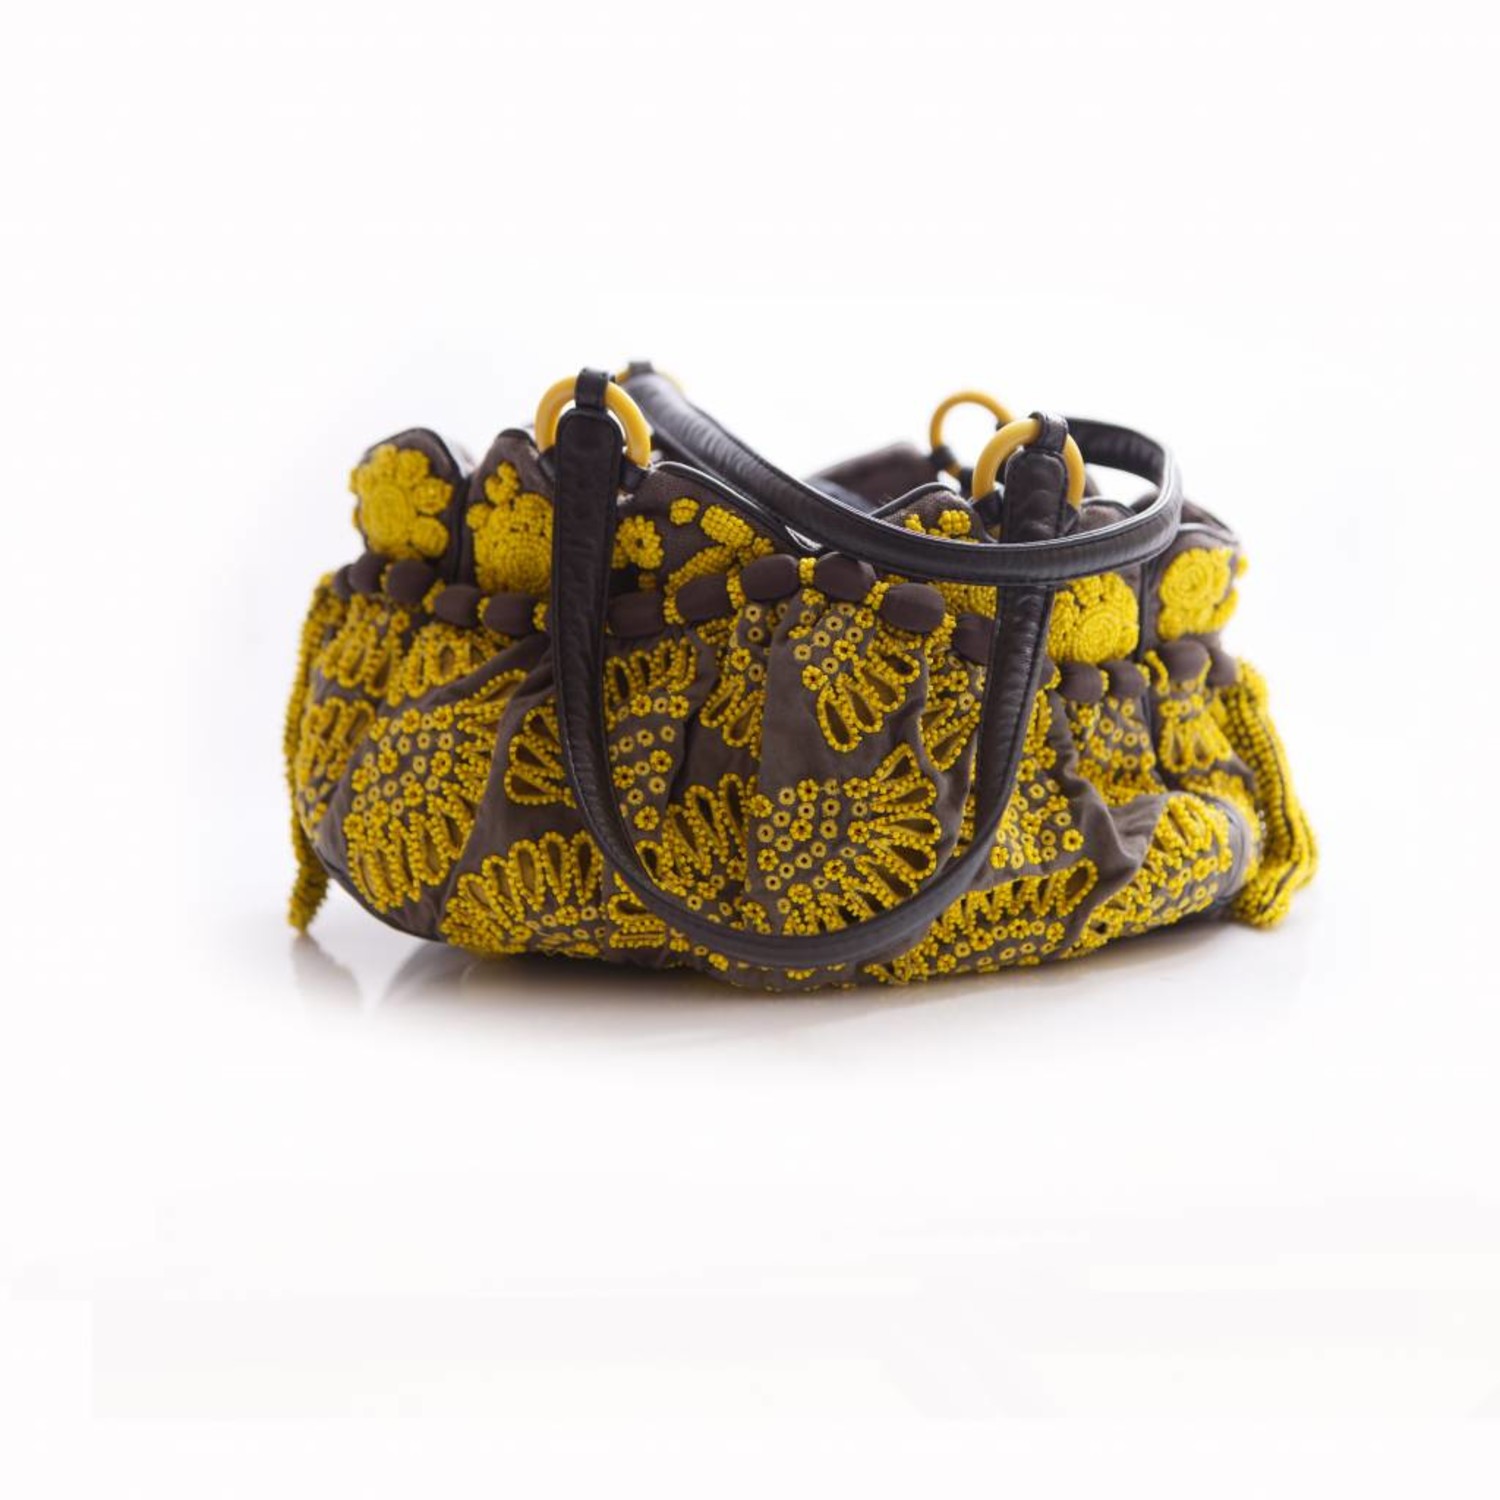 Jamin Puech, yellow/grey handbag from fabric with beads and